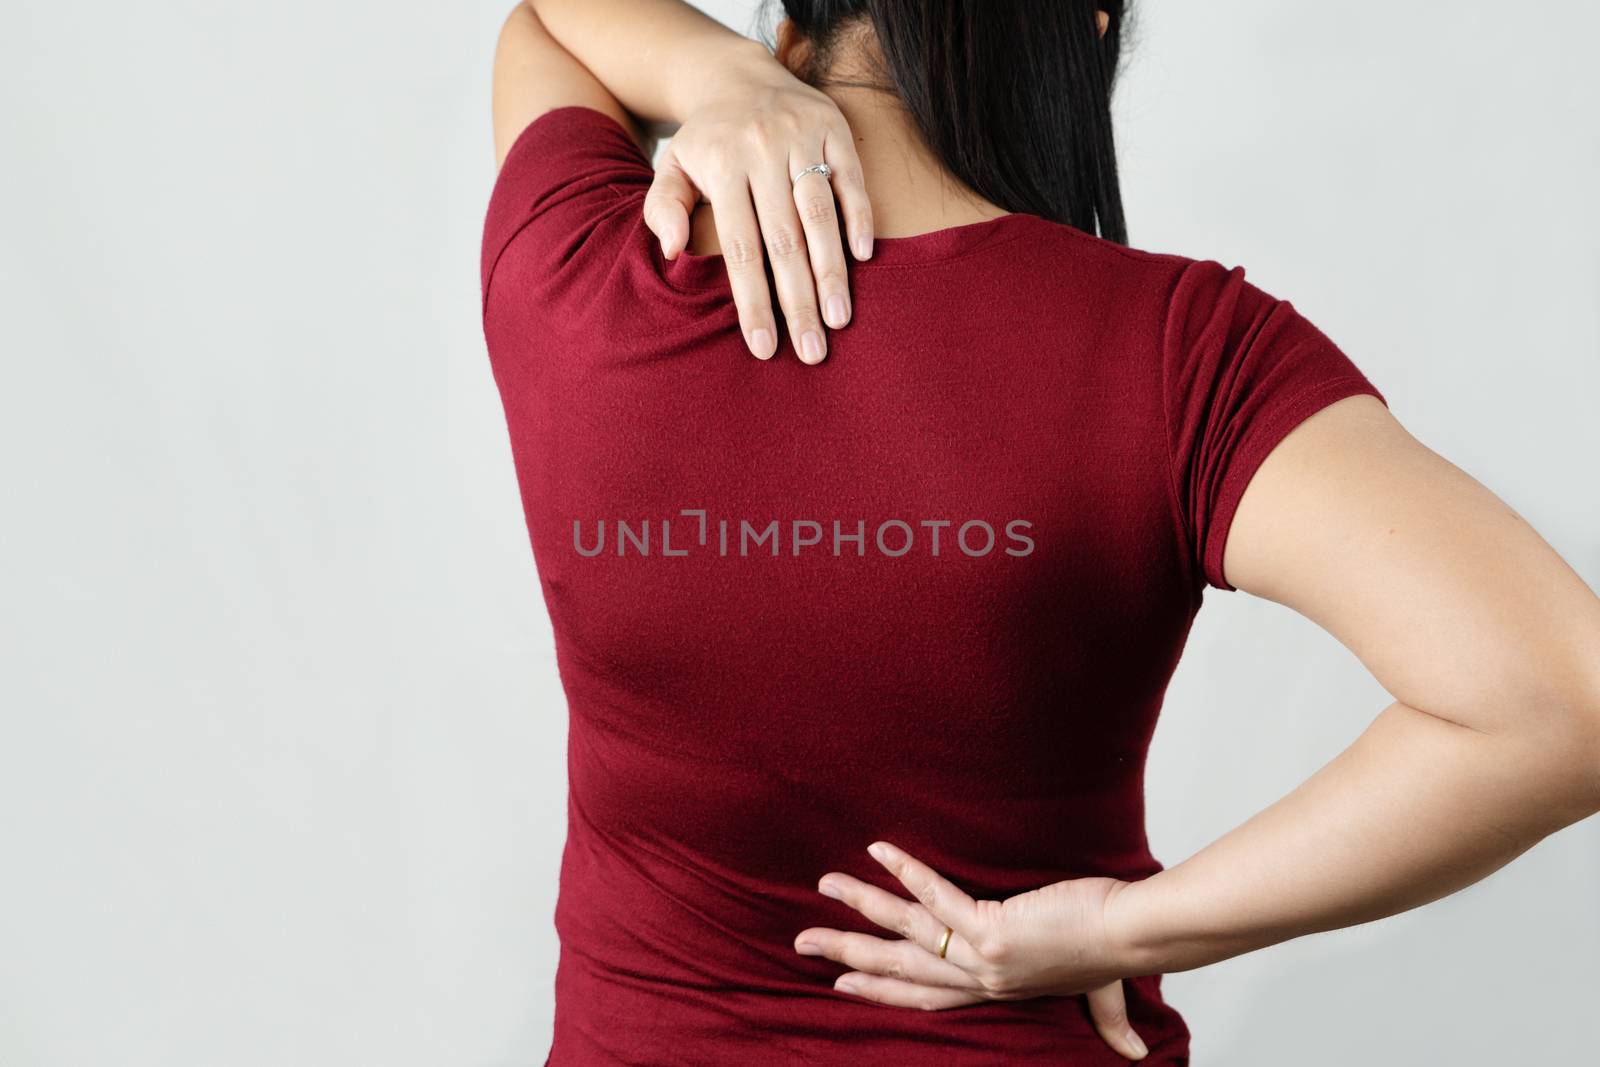 neck and back pain, young women injury, healthcare and medical concept